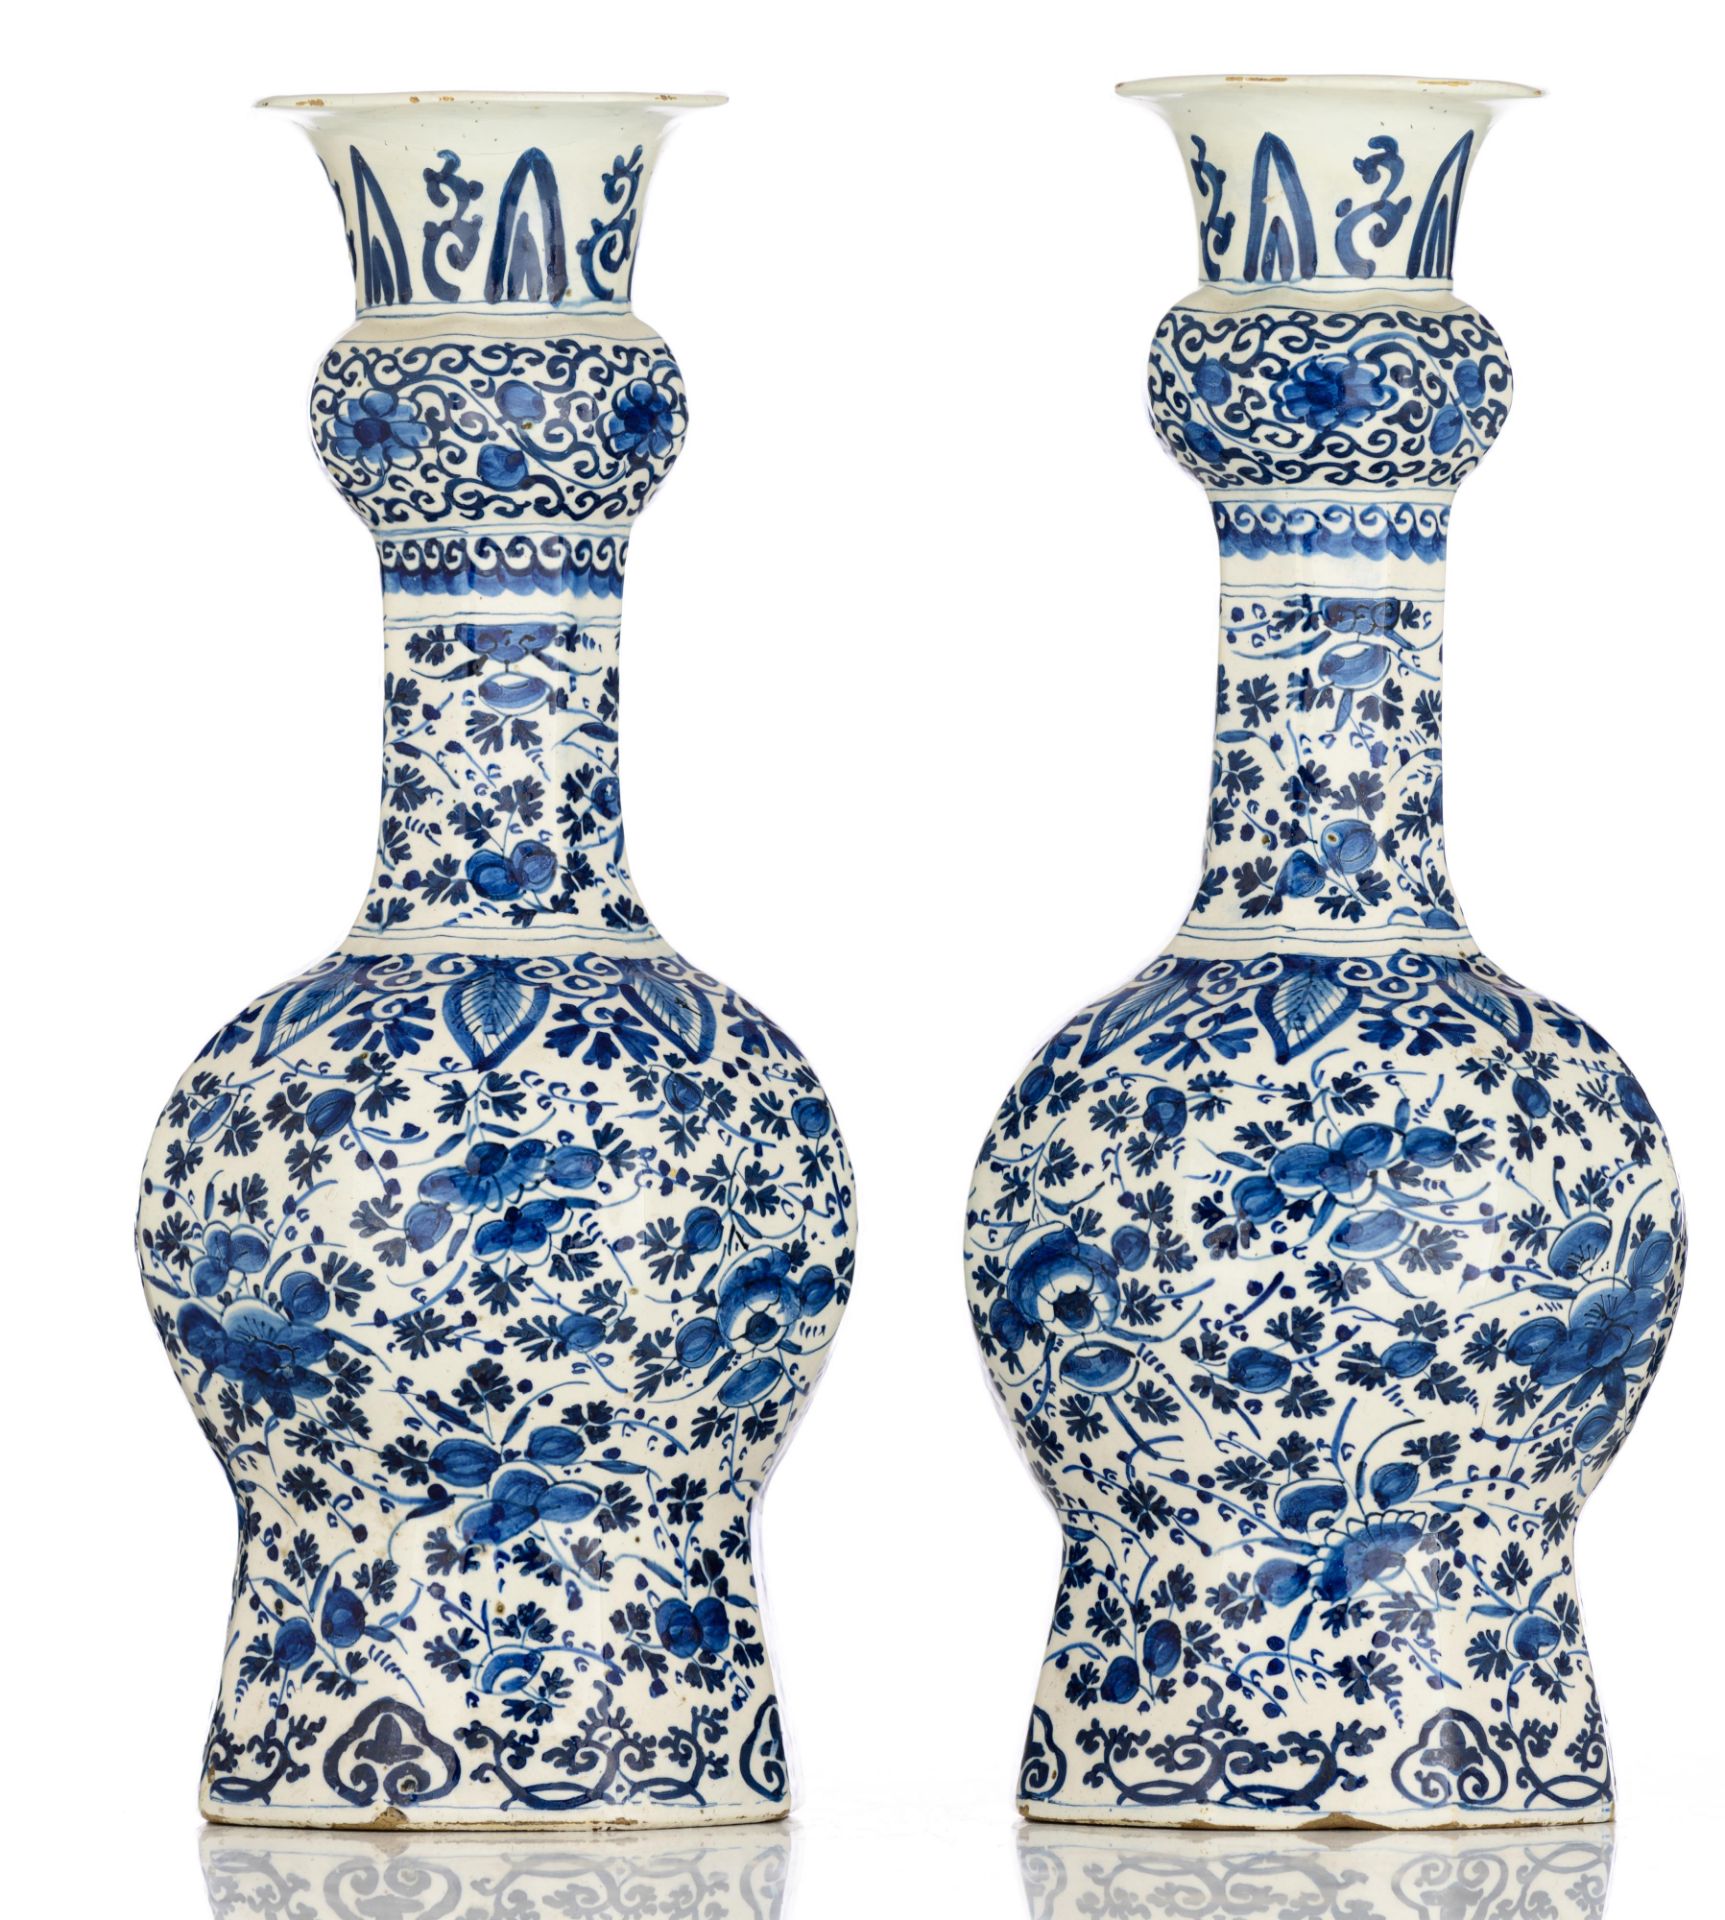 A pair of blue and white floral decorated Dutch Delftware garlic bottle vases, 18thC, H 37 cm. Added - Bild 4 aus 17